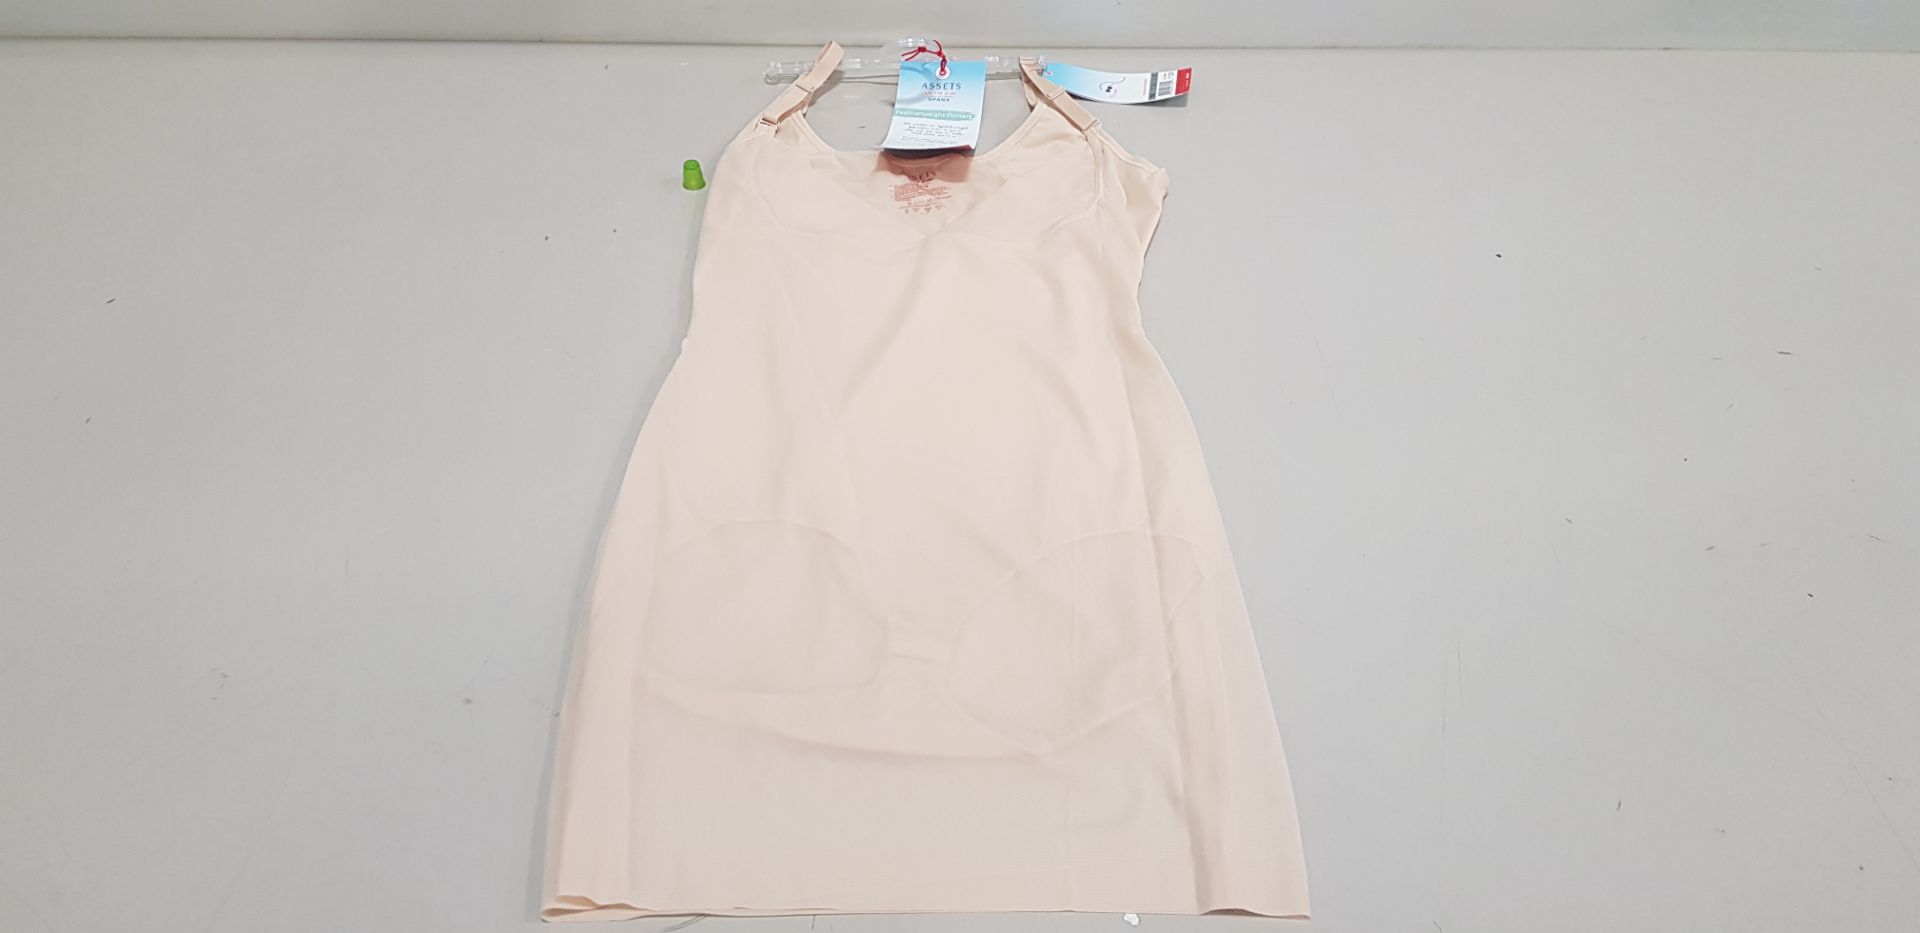 12 X BRAND NEW SPANX OPEN BUST BODY SLIP IN NUDE SIZE 1X RRP $60.00 (TOTAL RRP $720.00)